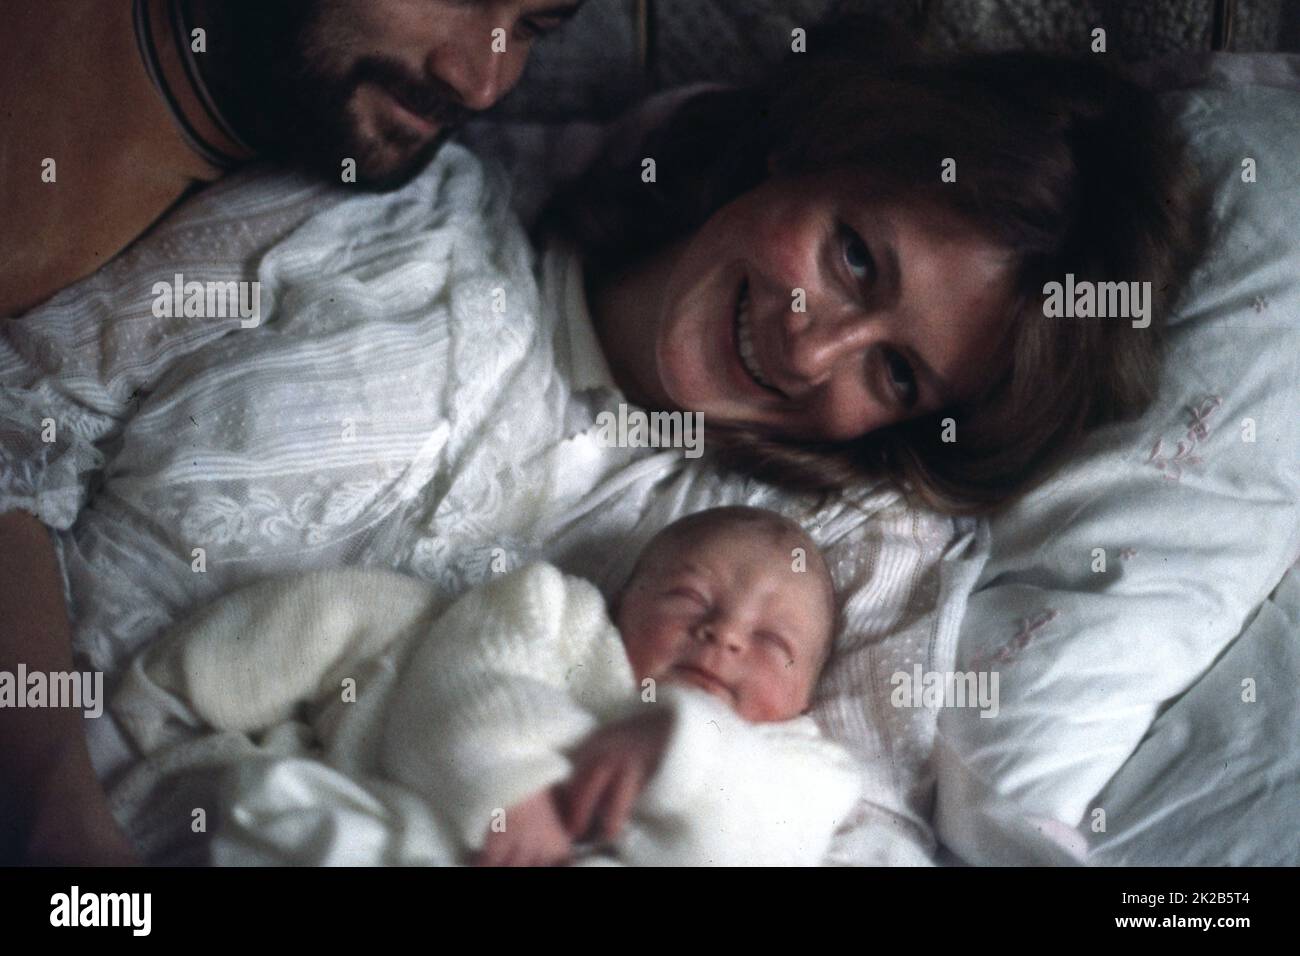 September 16, 1969 - British actress, VANESSA REDGRAVE proudly shows her newborn son, CARLO GABRIEL NERO, to the boys father, Italian actor FRANCO NERO, at her home in Chiswick, England. The parents are not married. (Credit Image: © Keystone Press Agency/ZUMA Press Wire) Stock Photo